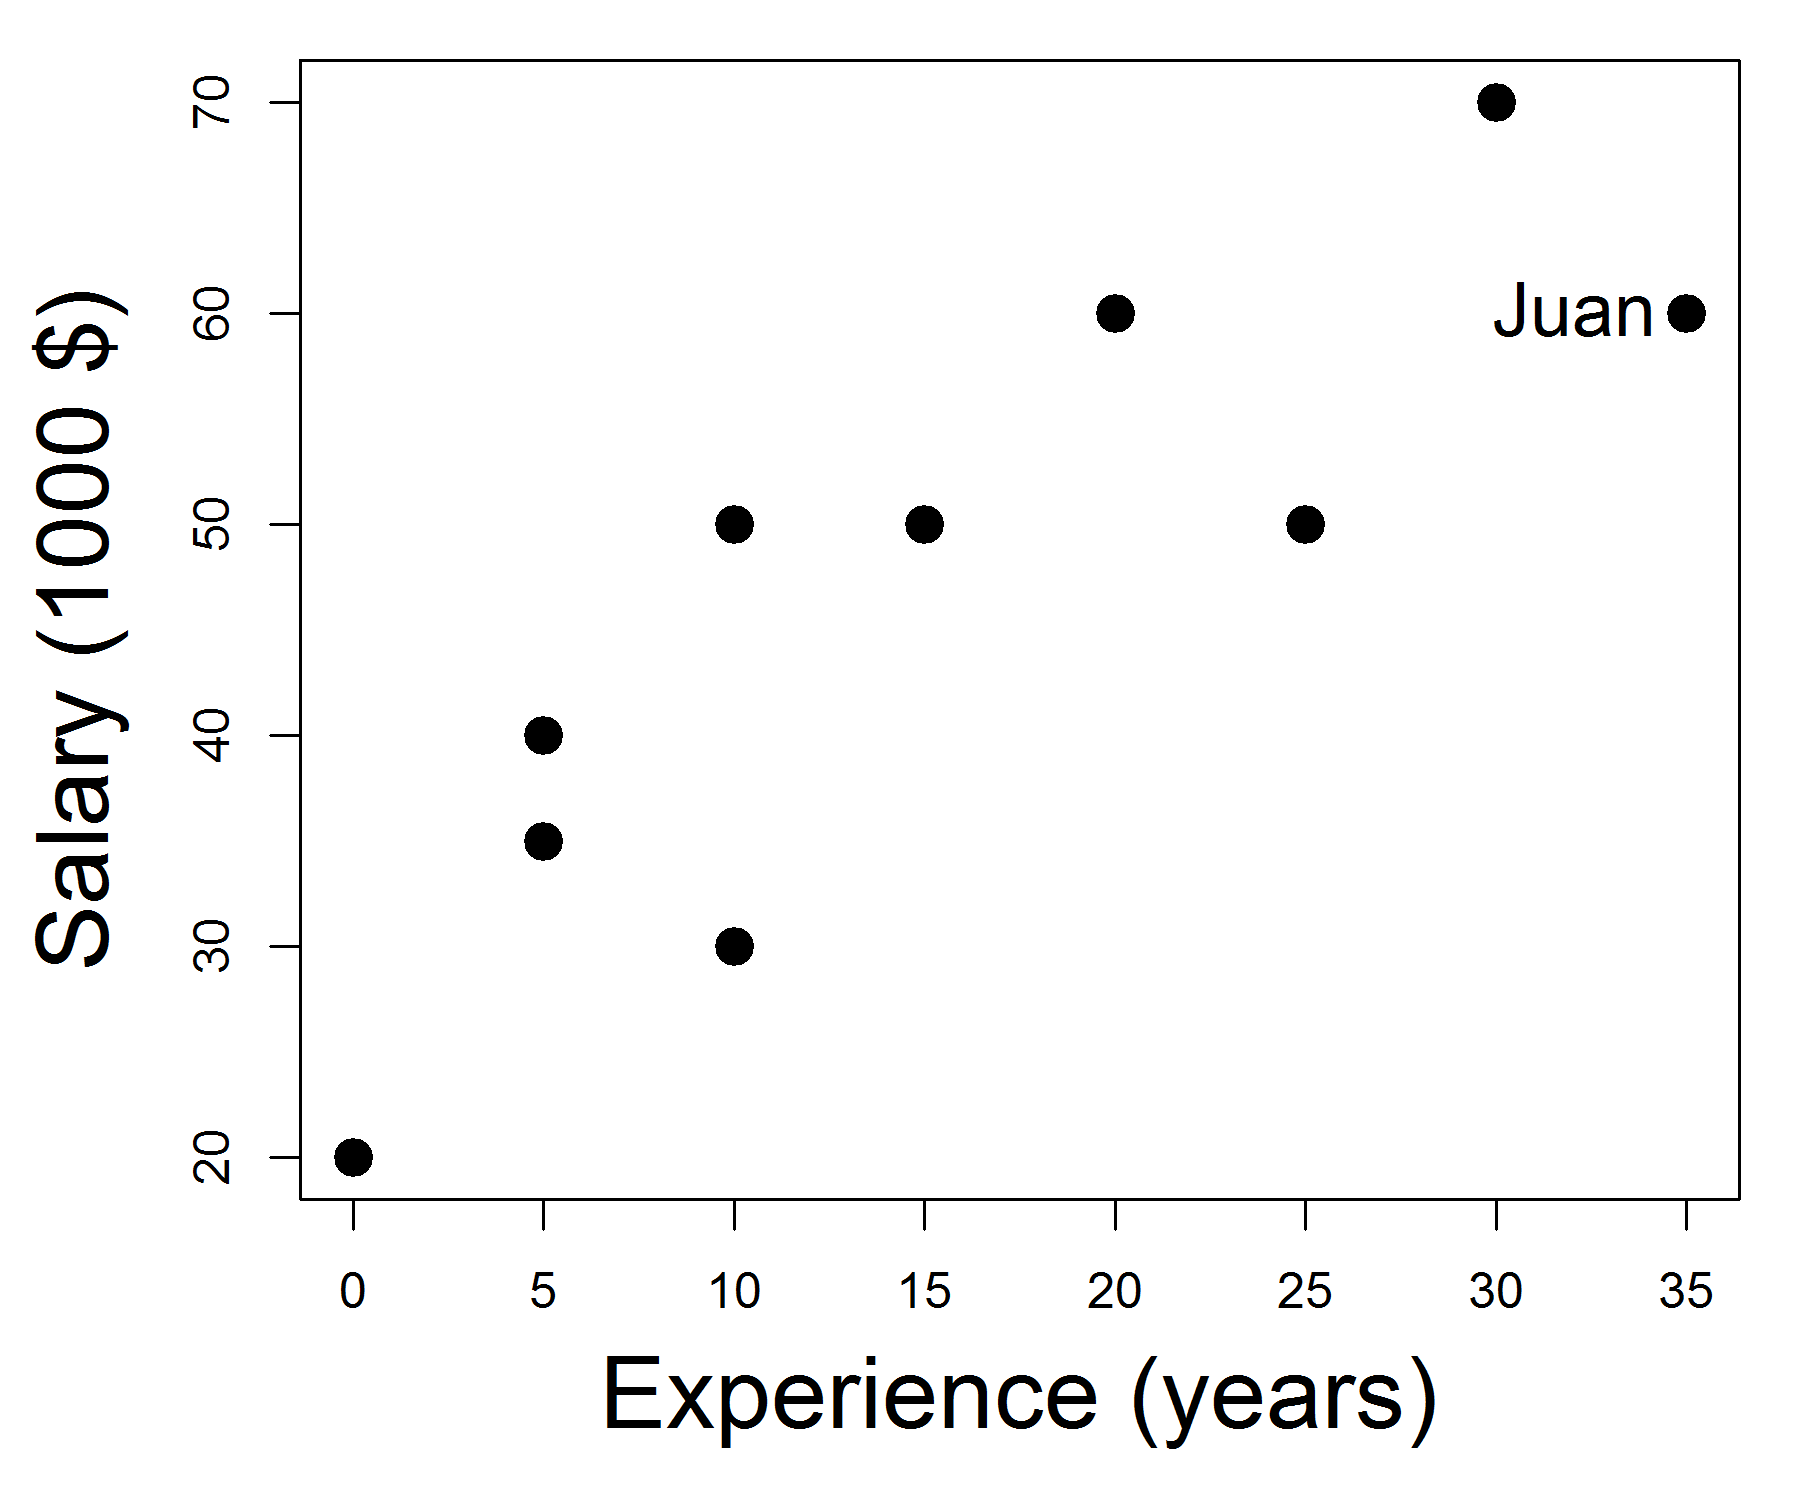 Modern scatterplot: A conventional modern scatterplot depicting the relation between salary and years of experience for a hypothetical group of ten workers.